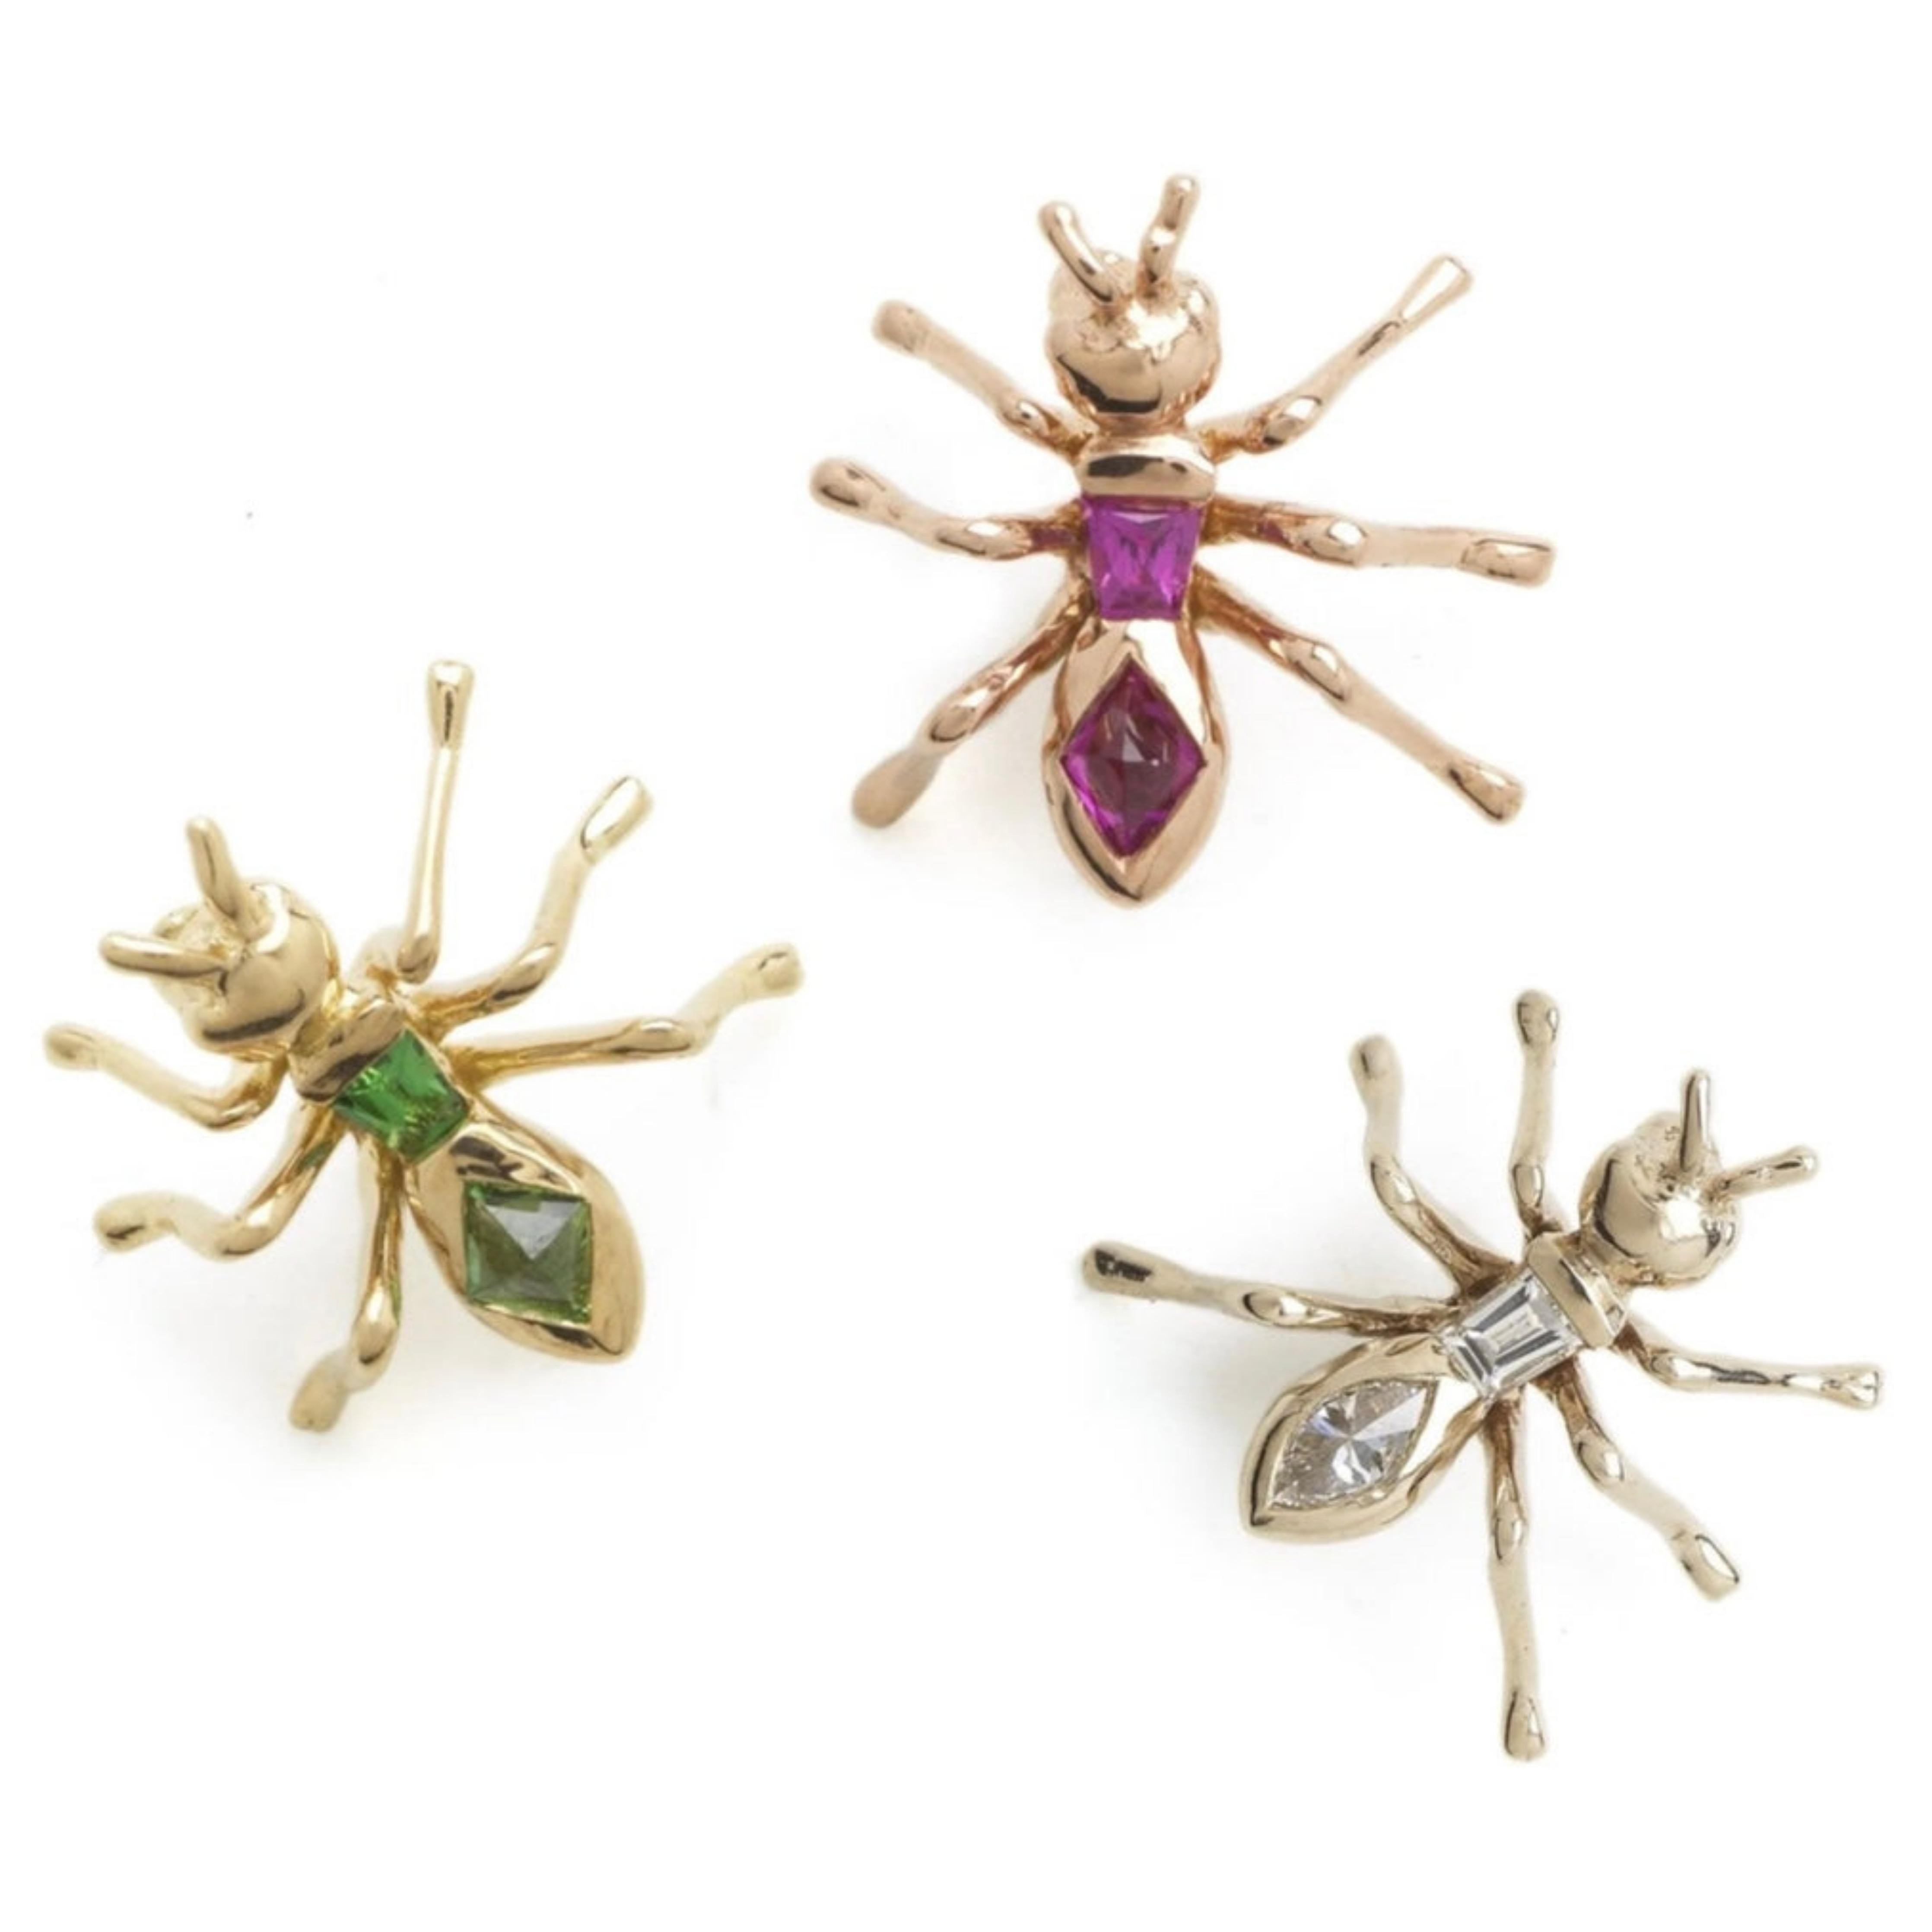 Bibi van der Velden Ant Single Stud Earring - Green Tsavorite. Sculptural single earring in the shape of an ant with two Green Tsavorite stone forming the body. Earring shown in different colored stone options.